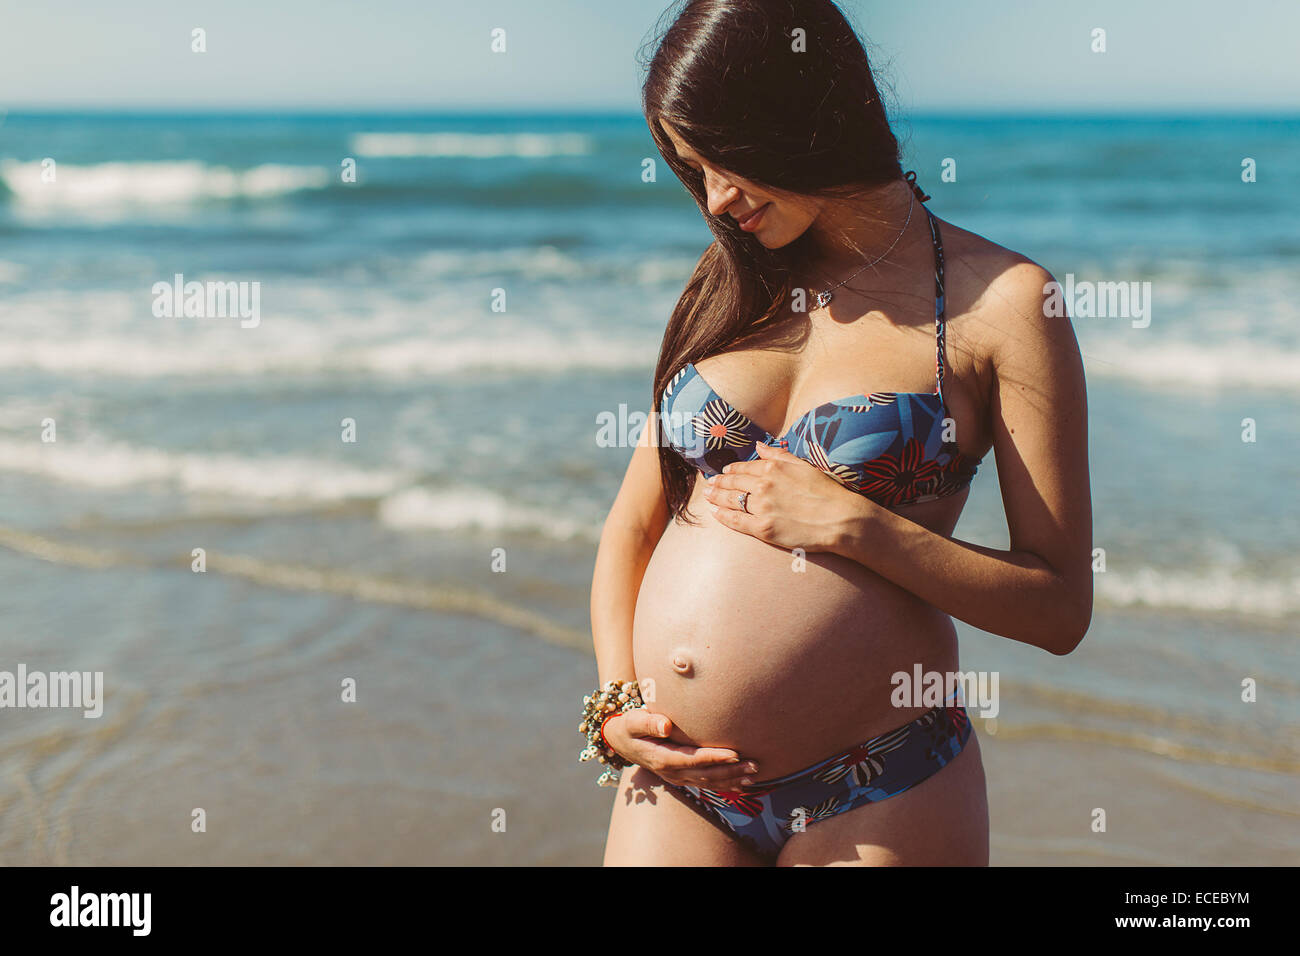 Young pregnant woman standing on beach Stock Photo